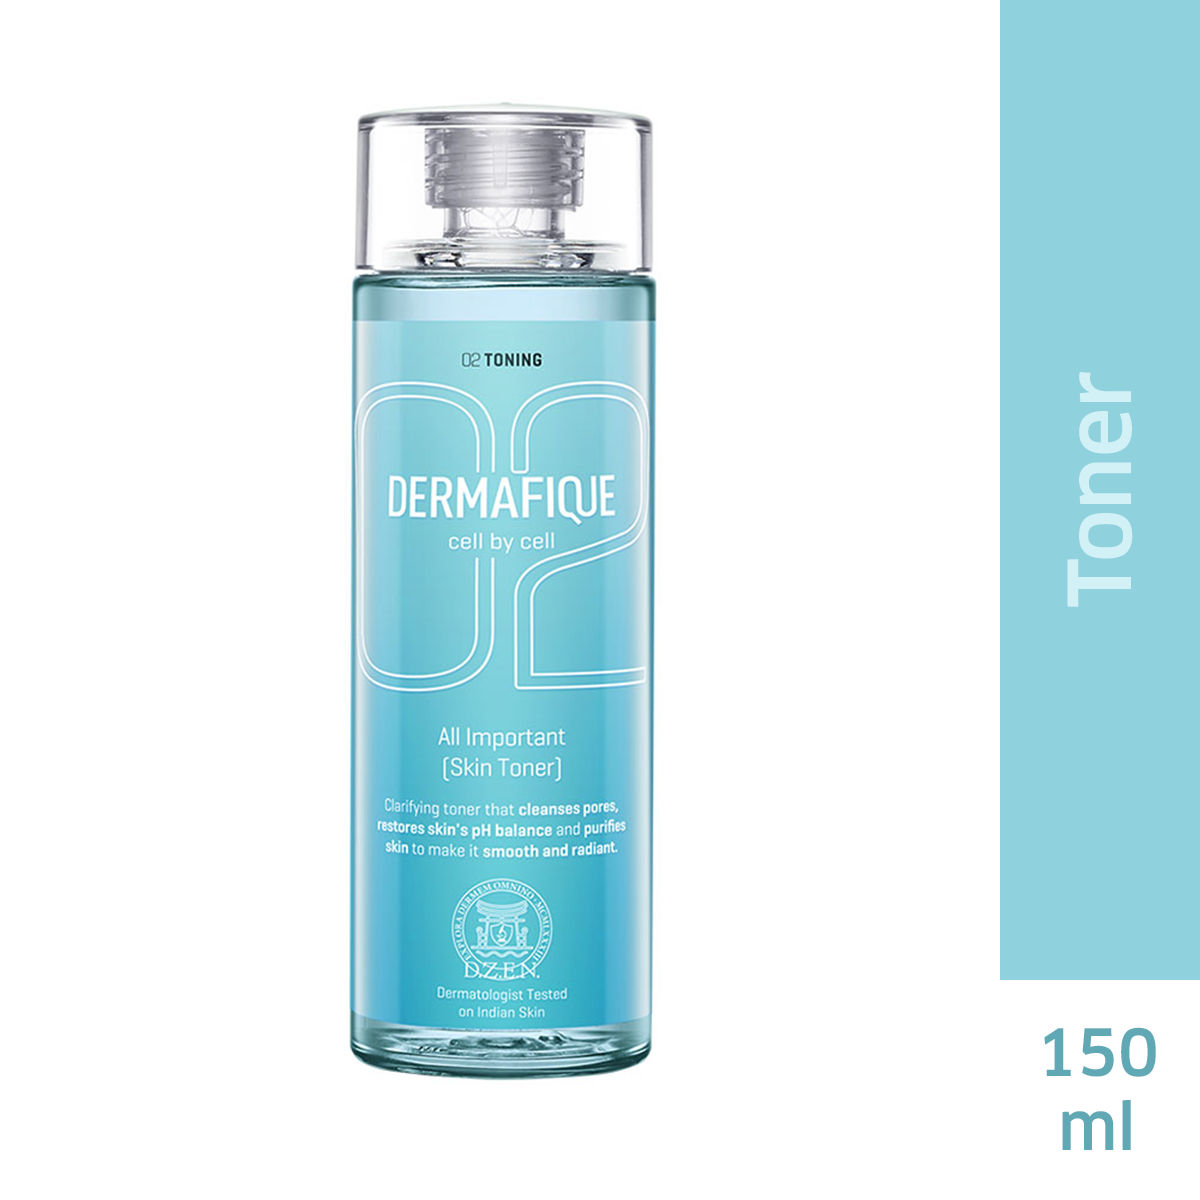 Dermafique All Important Alcohol free Skin Toner with Vitamin E & Hyaluronic Acid, SLES free